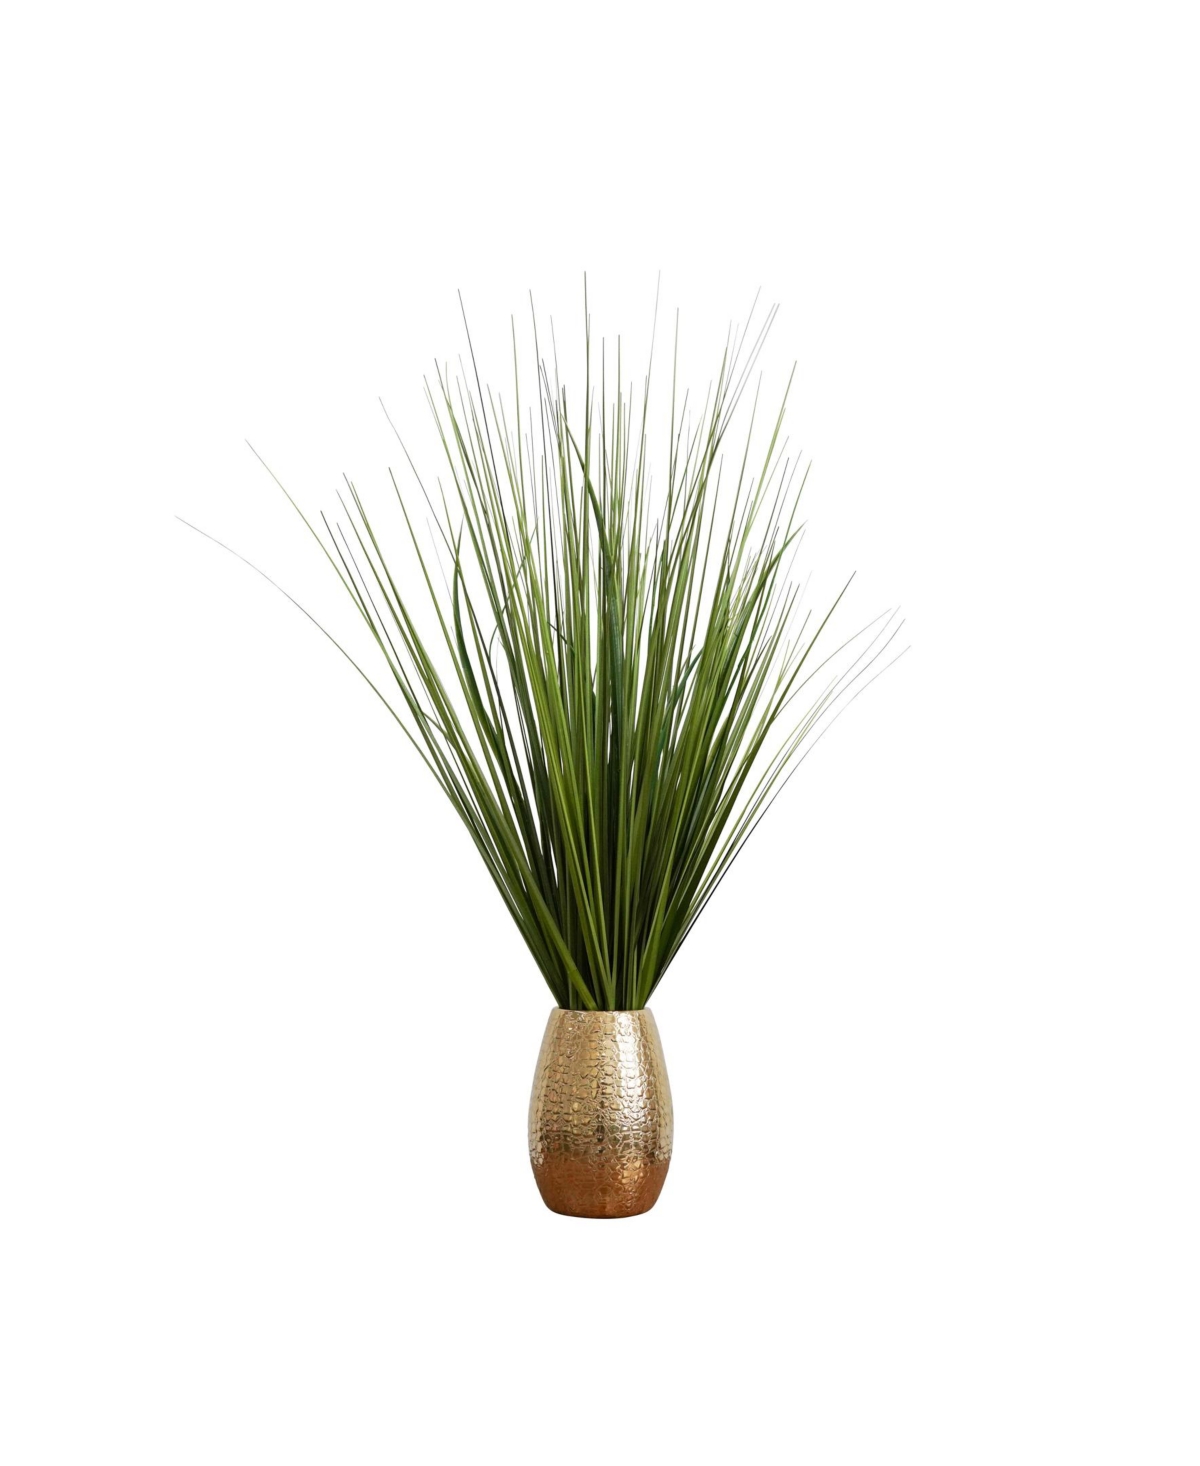 Tabletop Artificial Foliage in Crackled Ceramic Pot, 30" - Gold-Tone